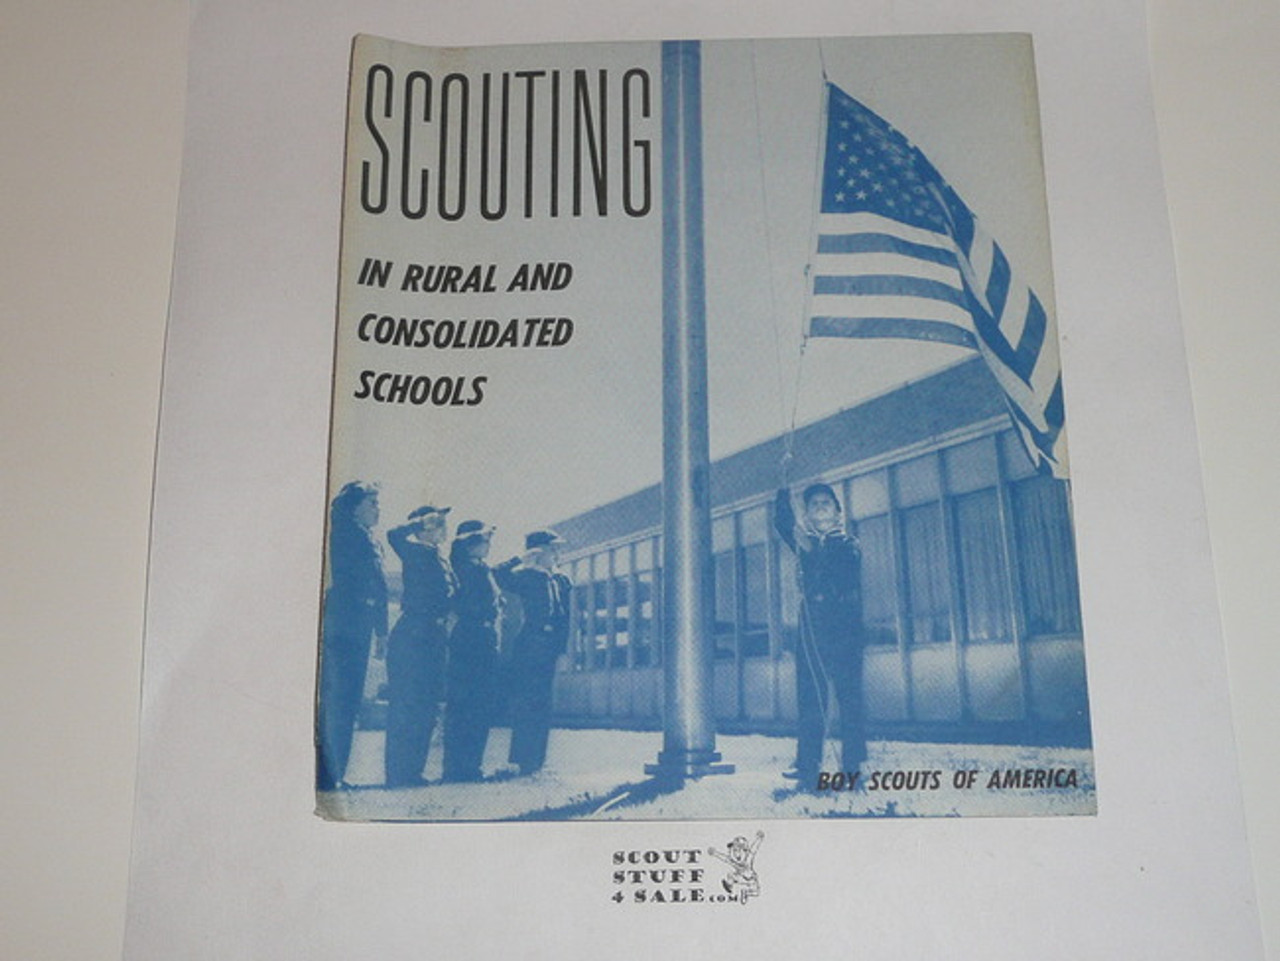 1964 Scouting in Rural and Consolidated Schools Brochure